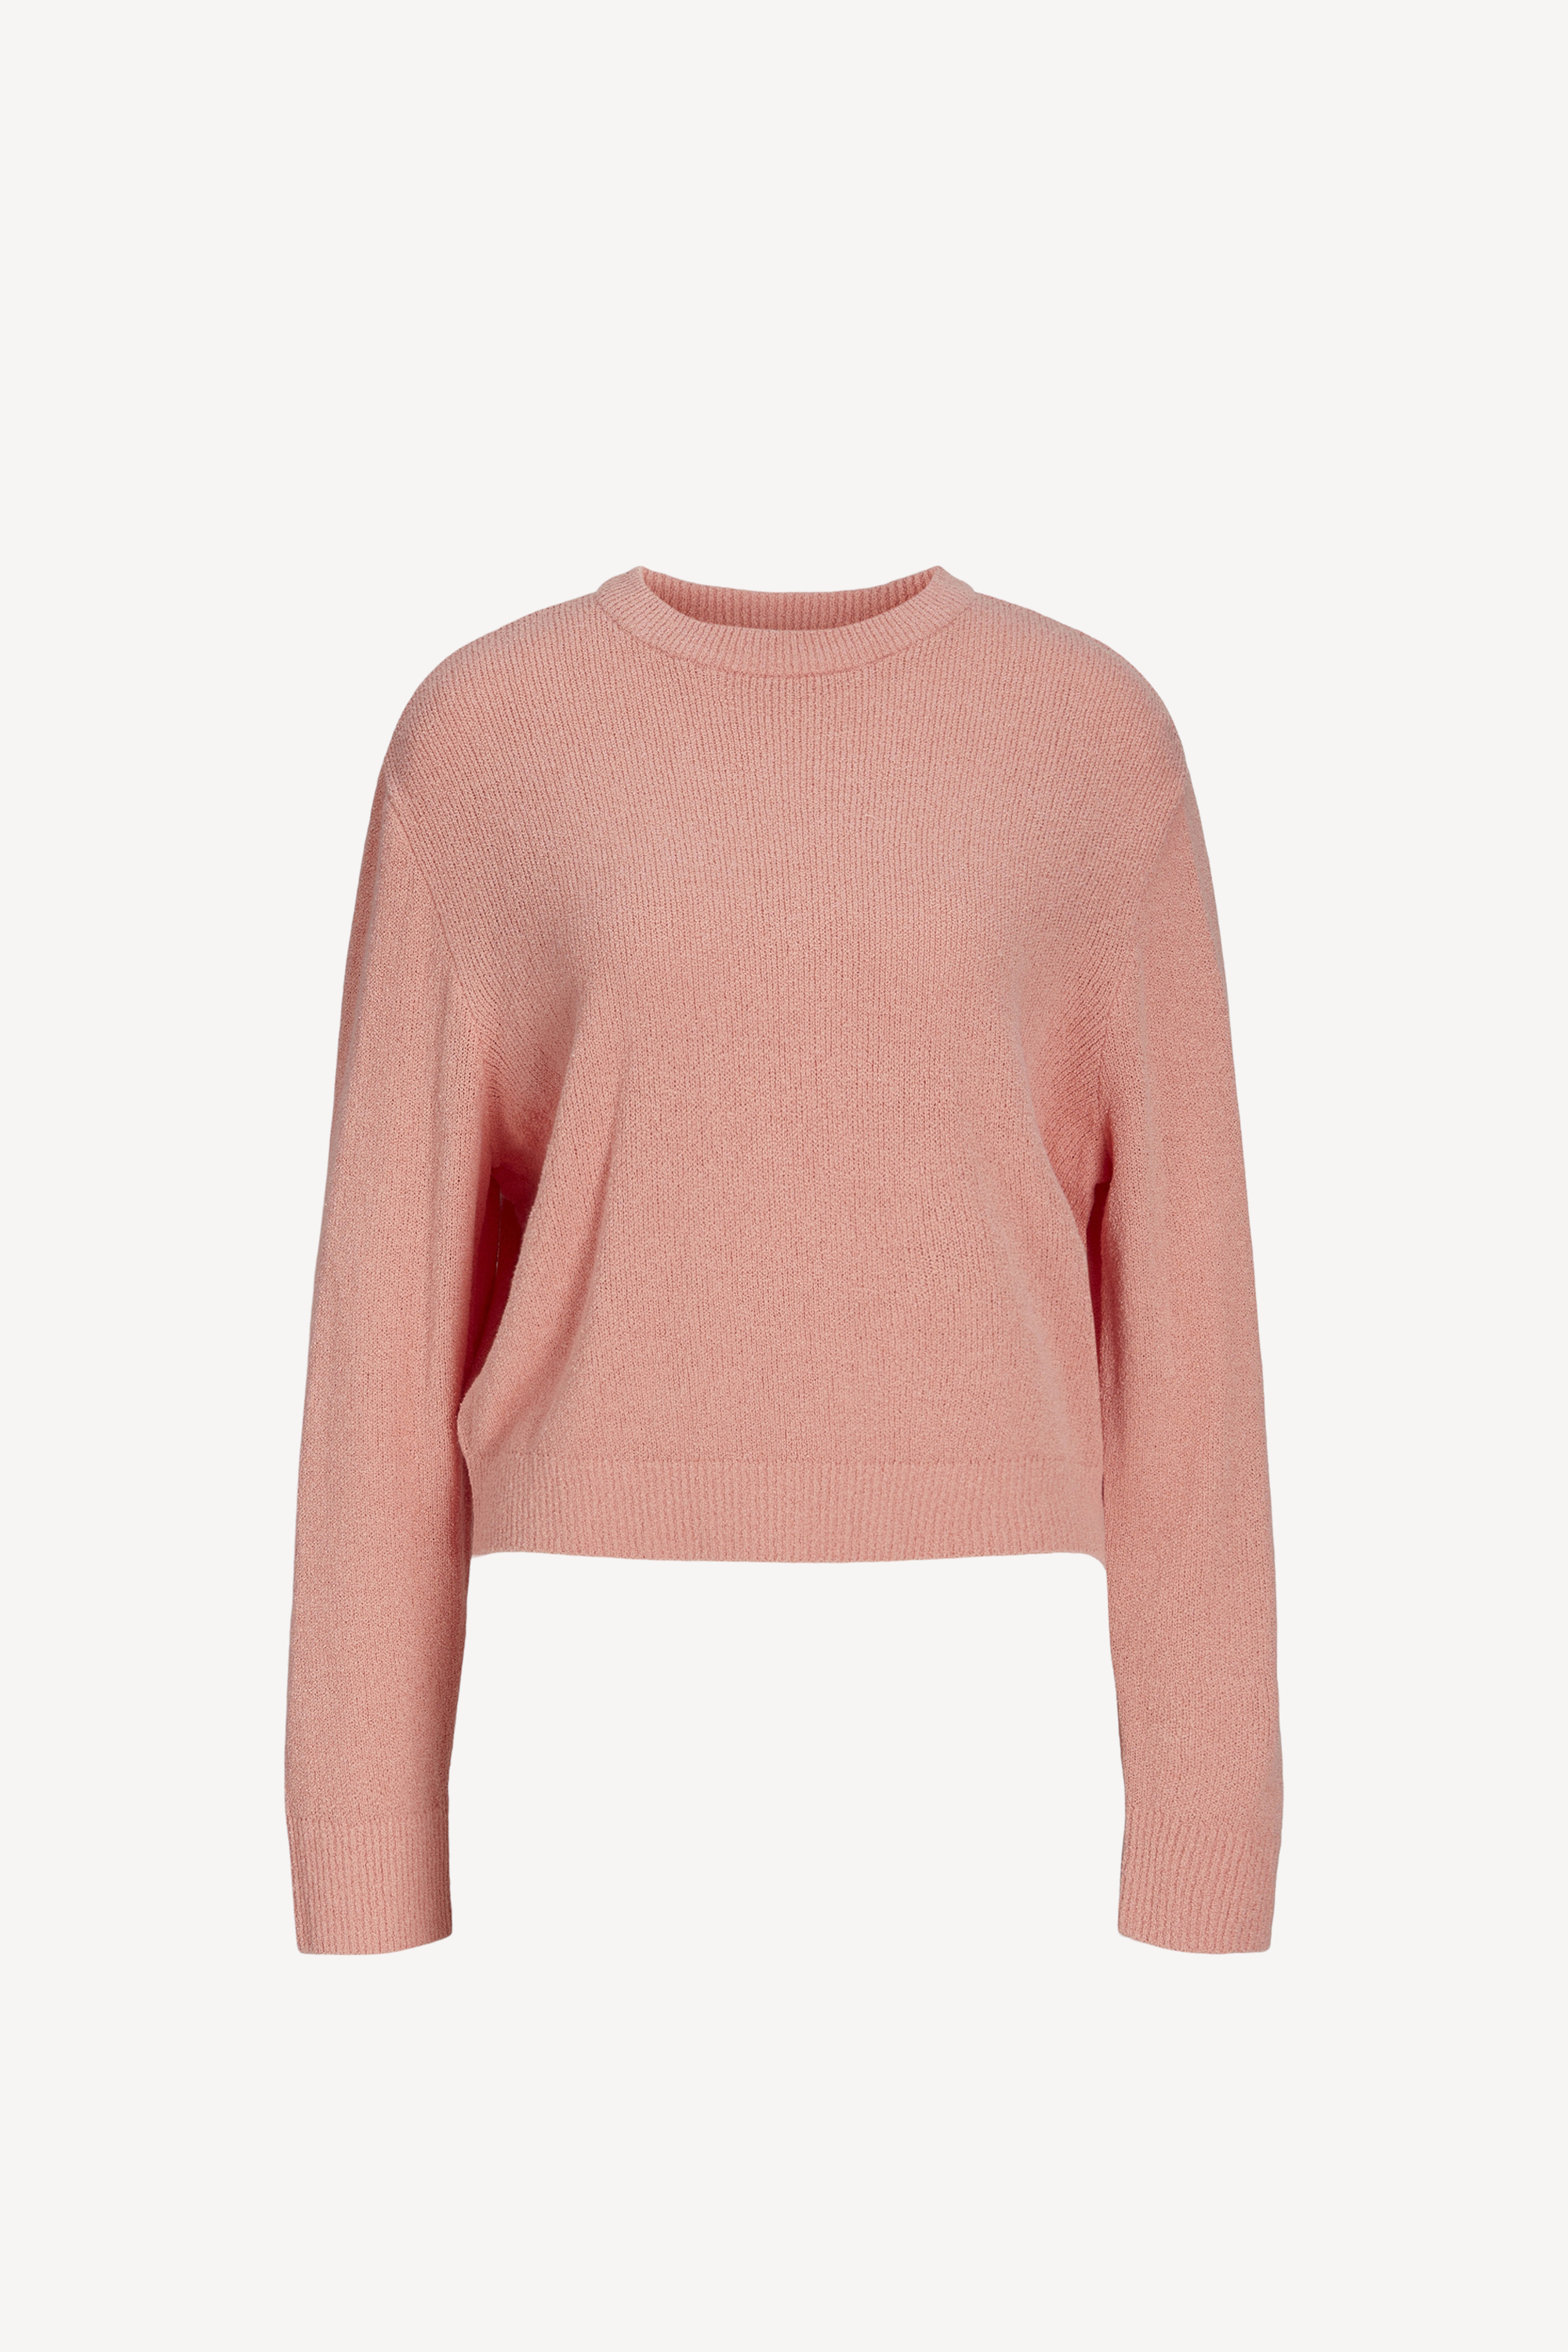 Daisy Crew Neck Knit Burnt Coral